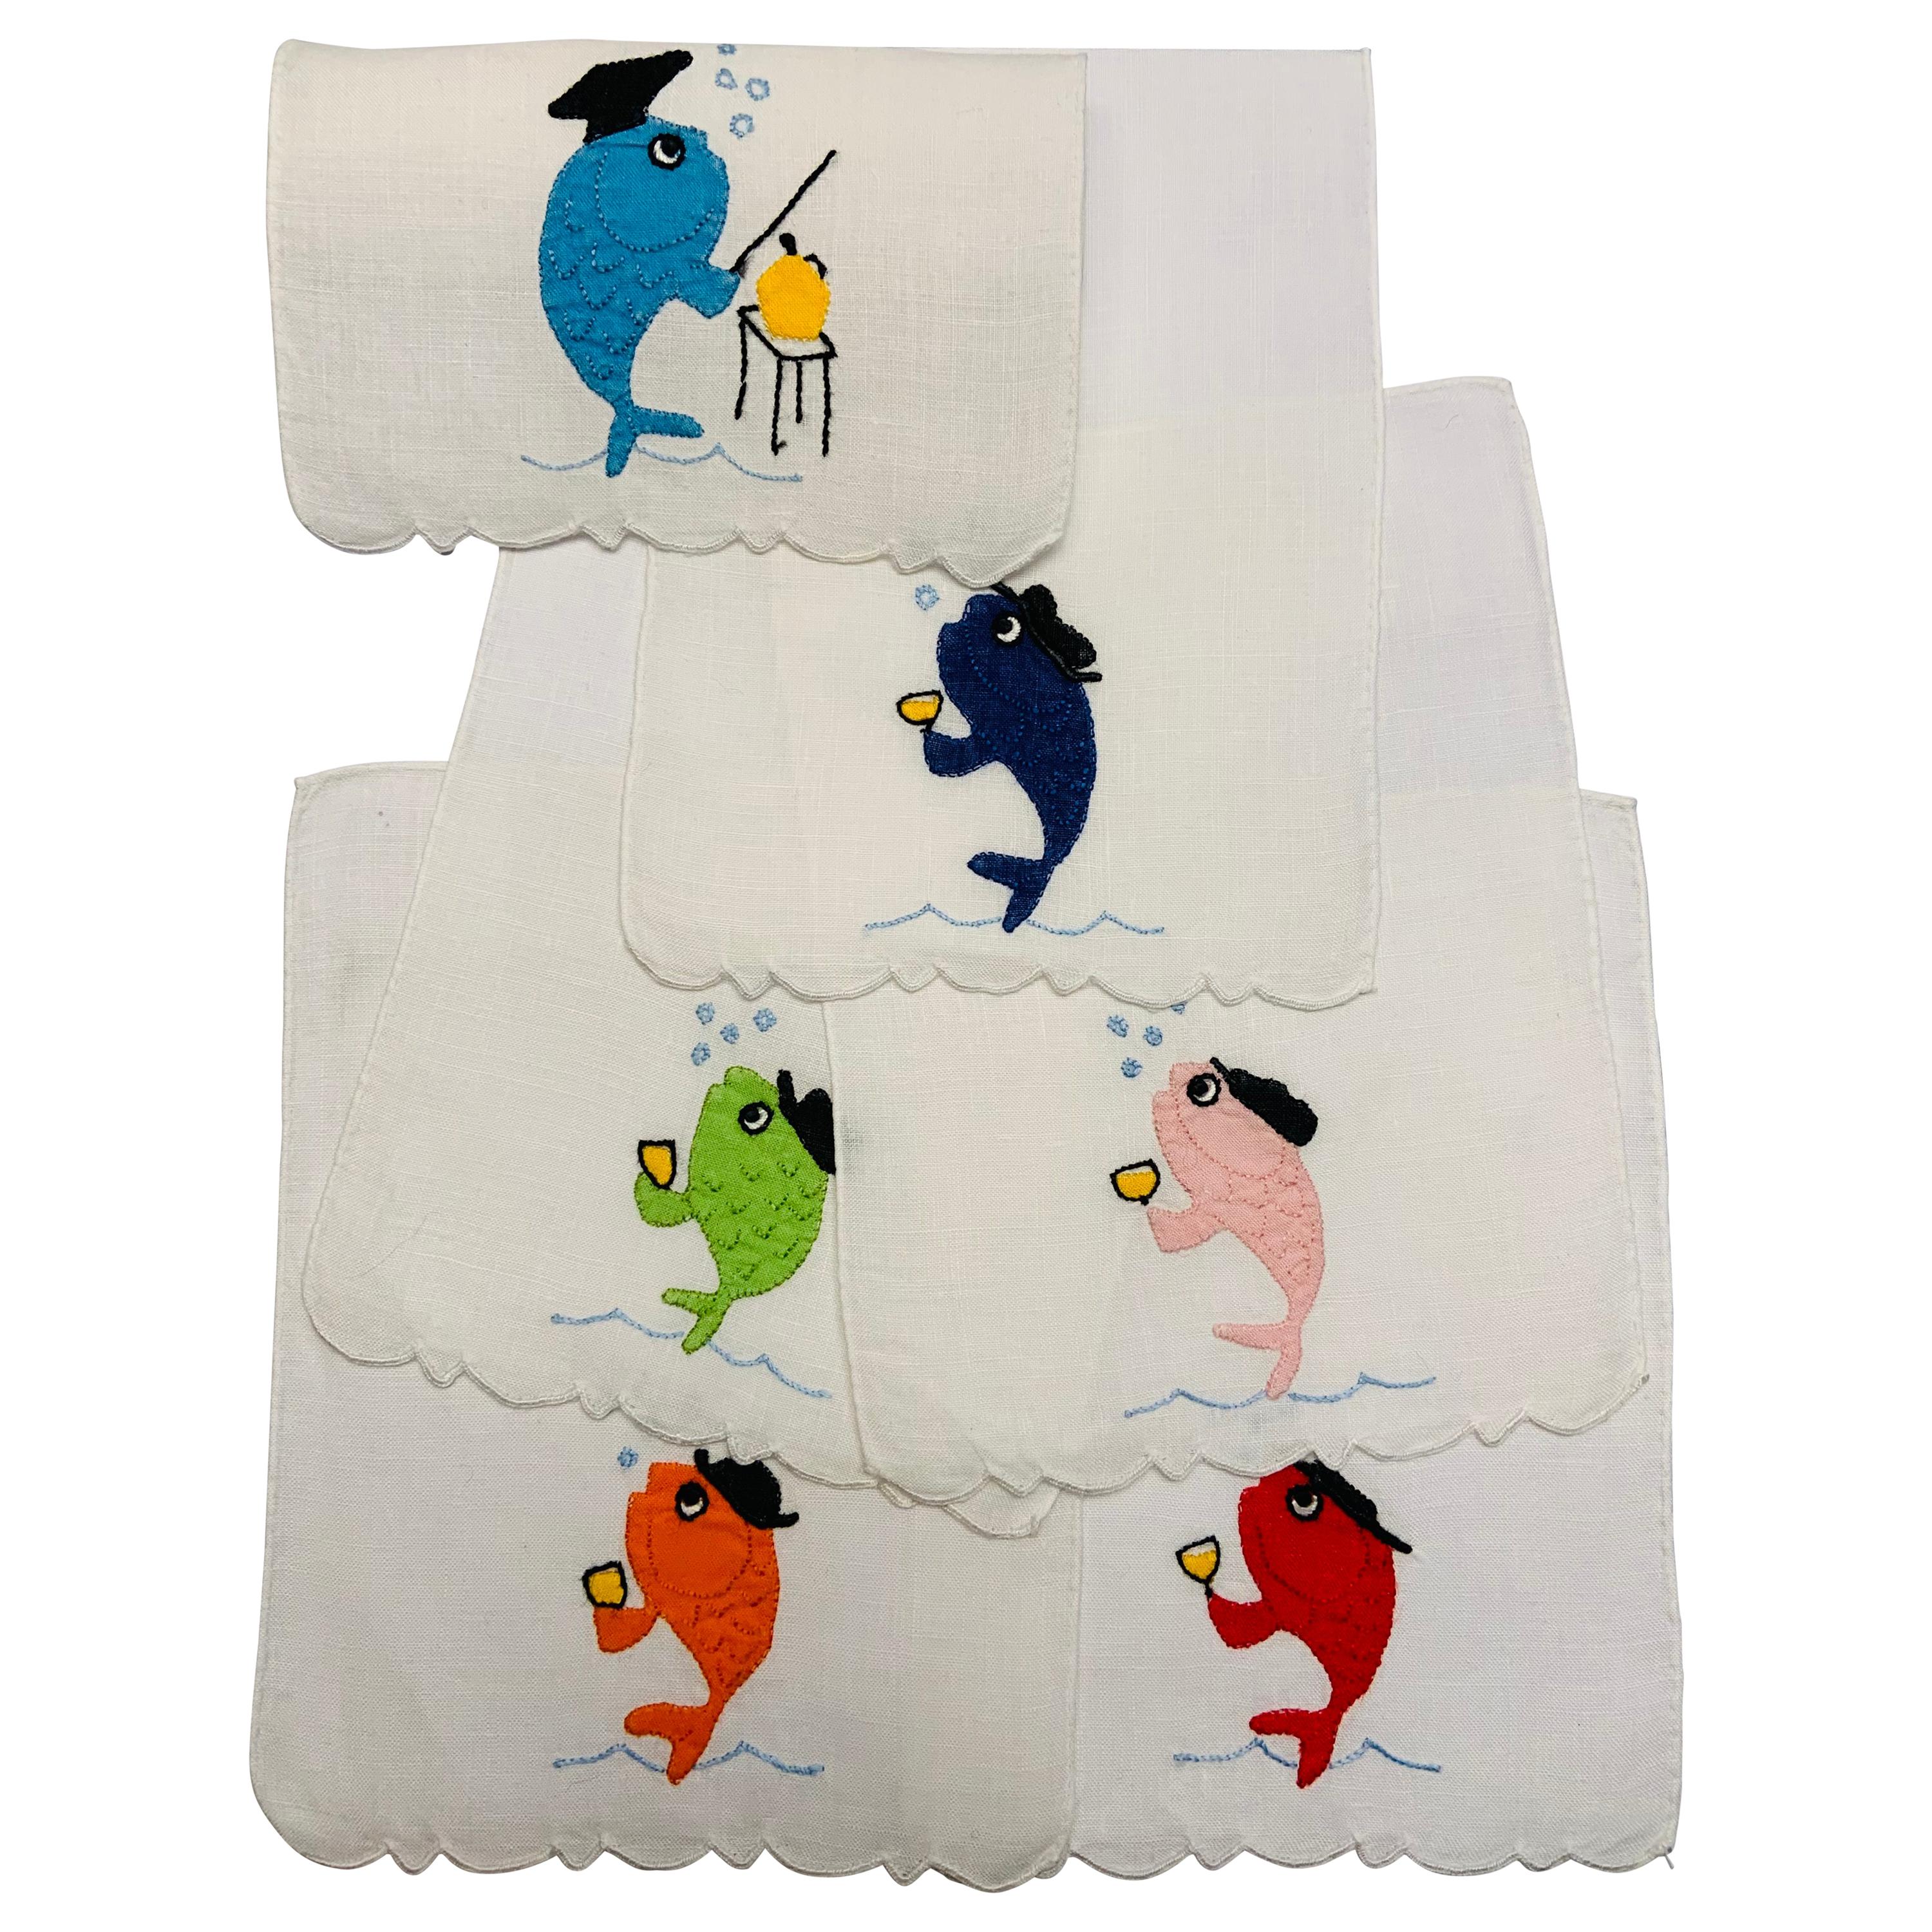 School of Fish Appliqued and Embroidered Linen Cocktail Napkins, Set of Six